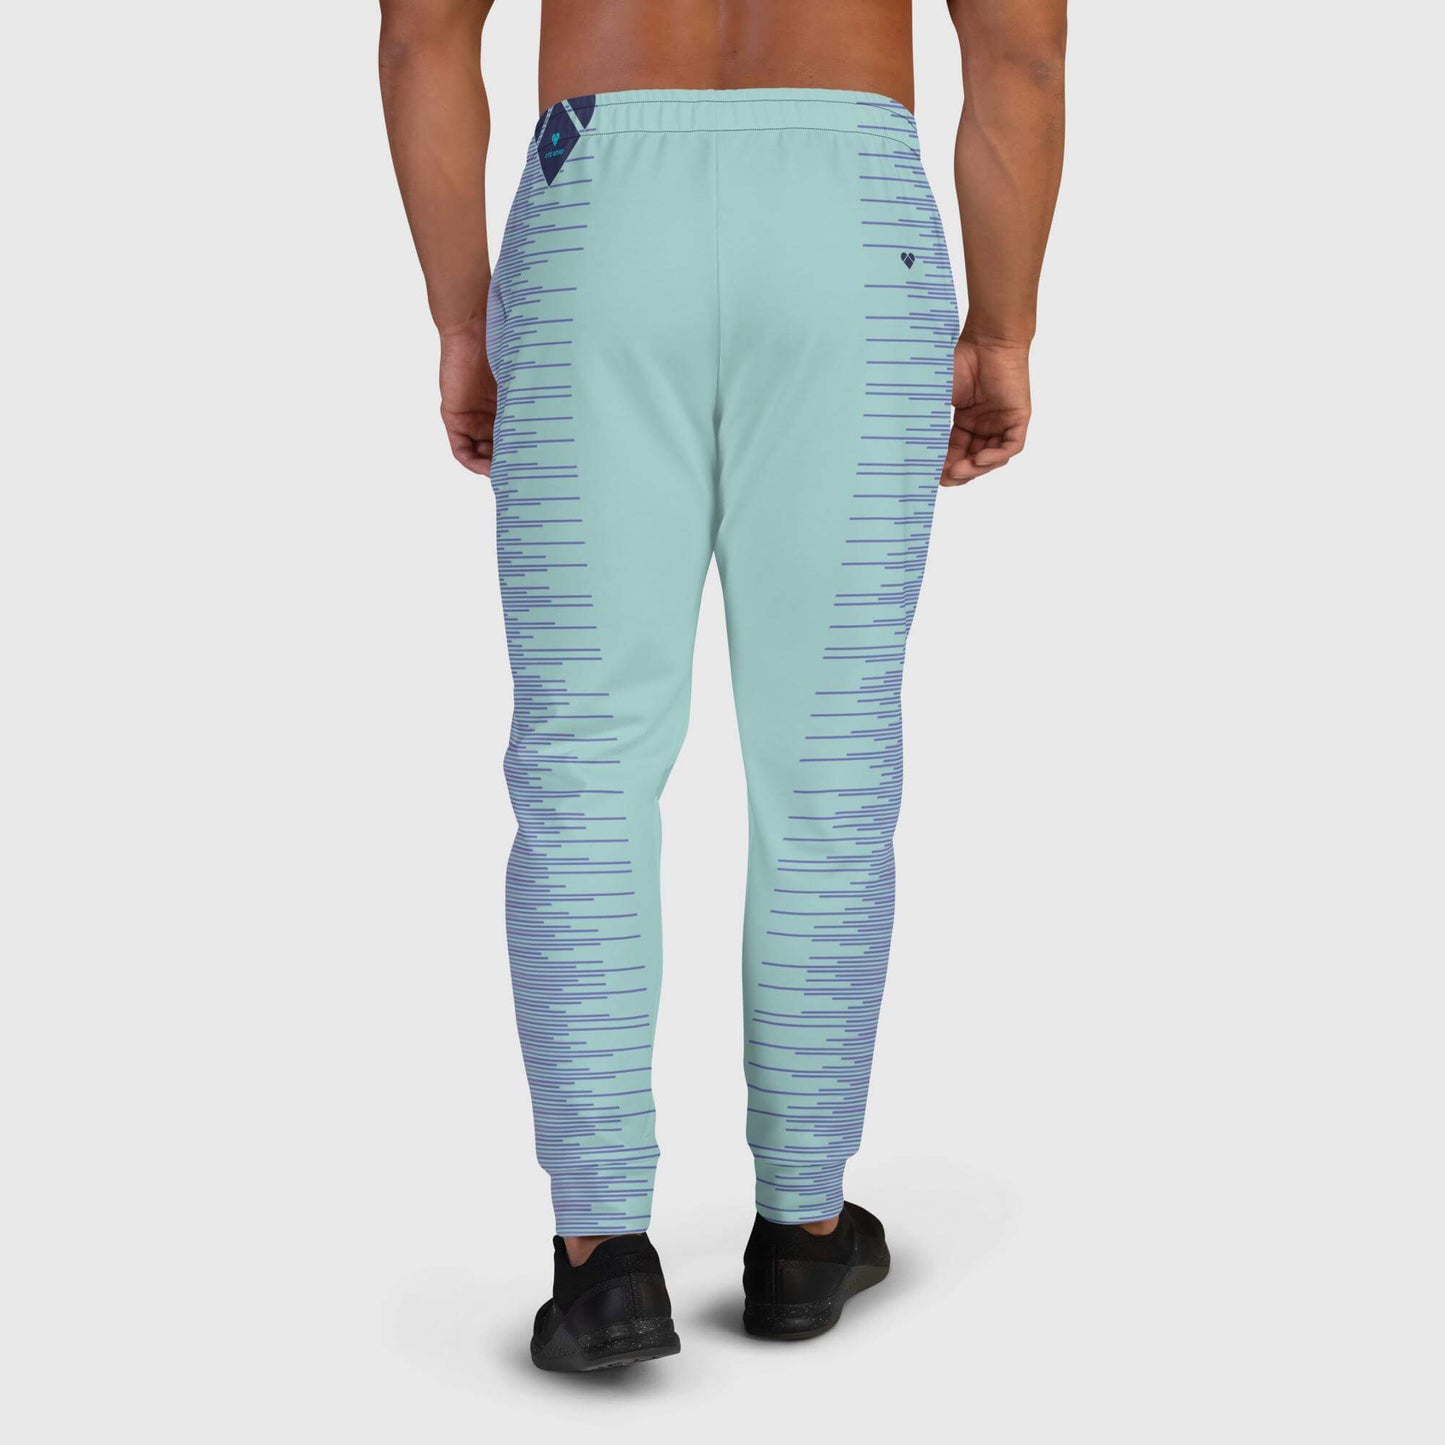 Men's Mint Joggers with Pink and Periwinkle Gradient Accents